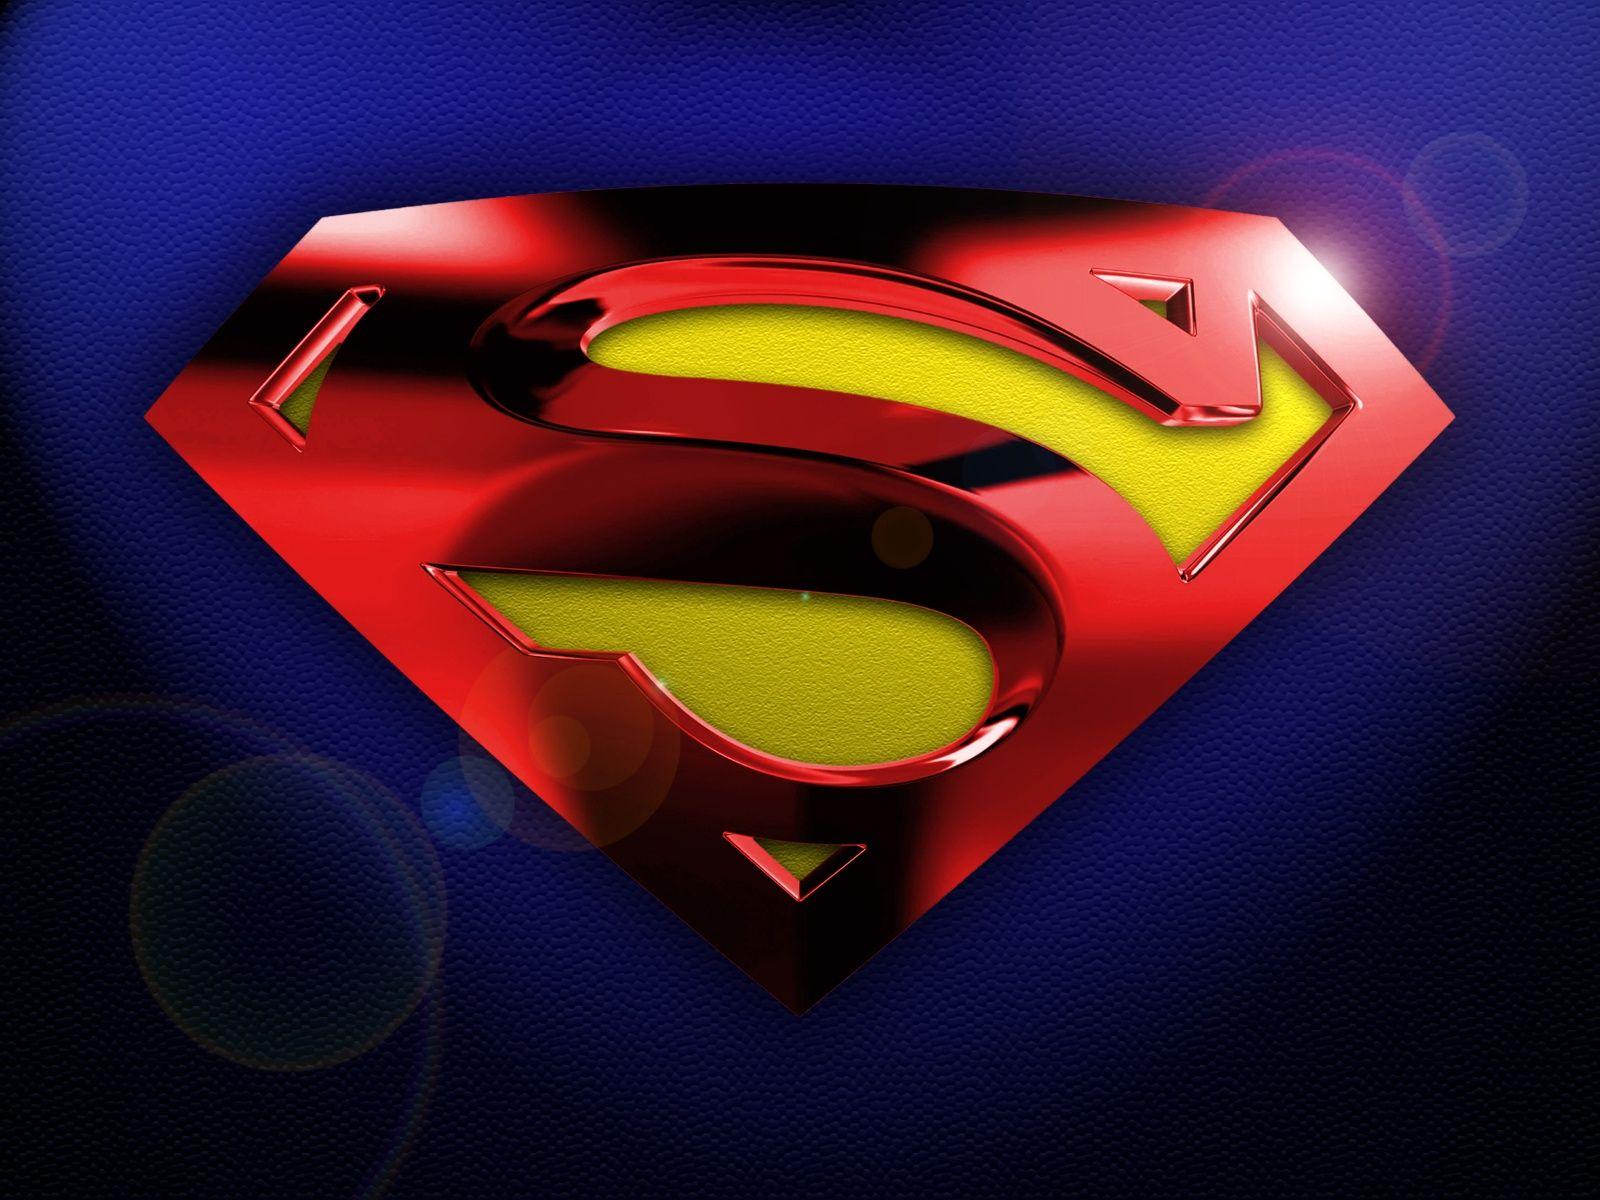 Awesome Superman Logo 3D Wallpaper. Download wallpaper page